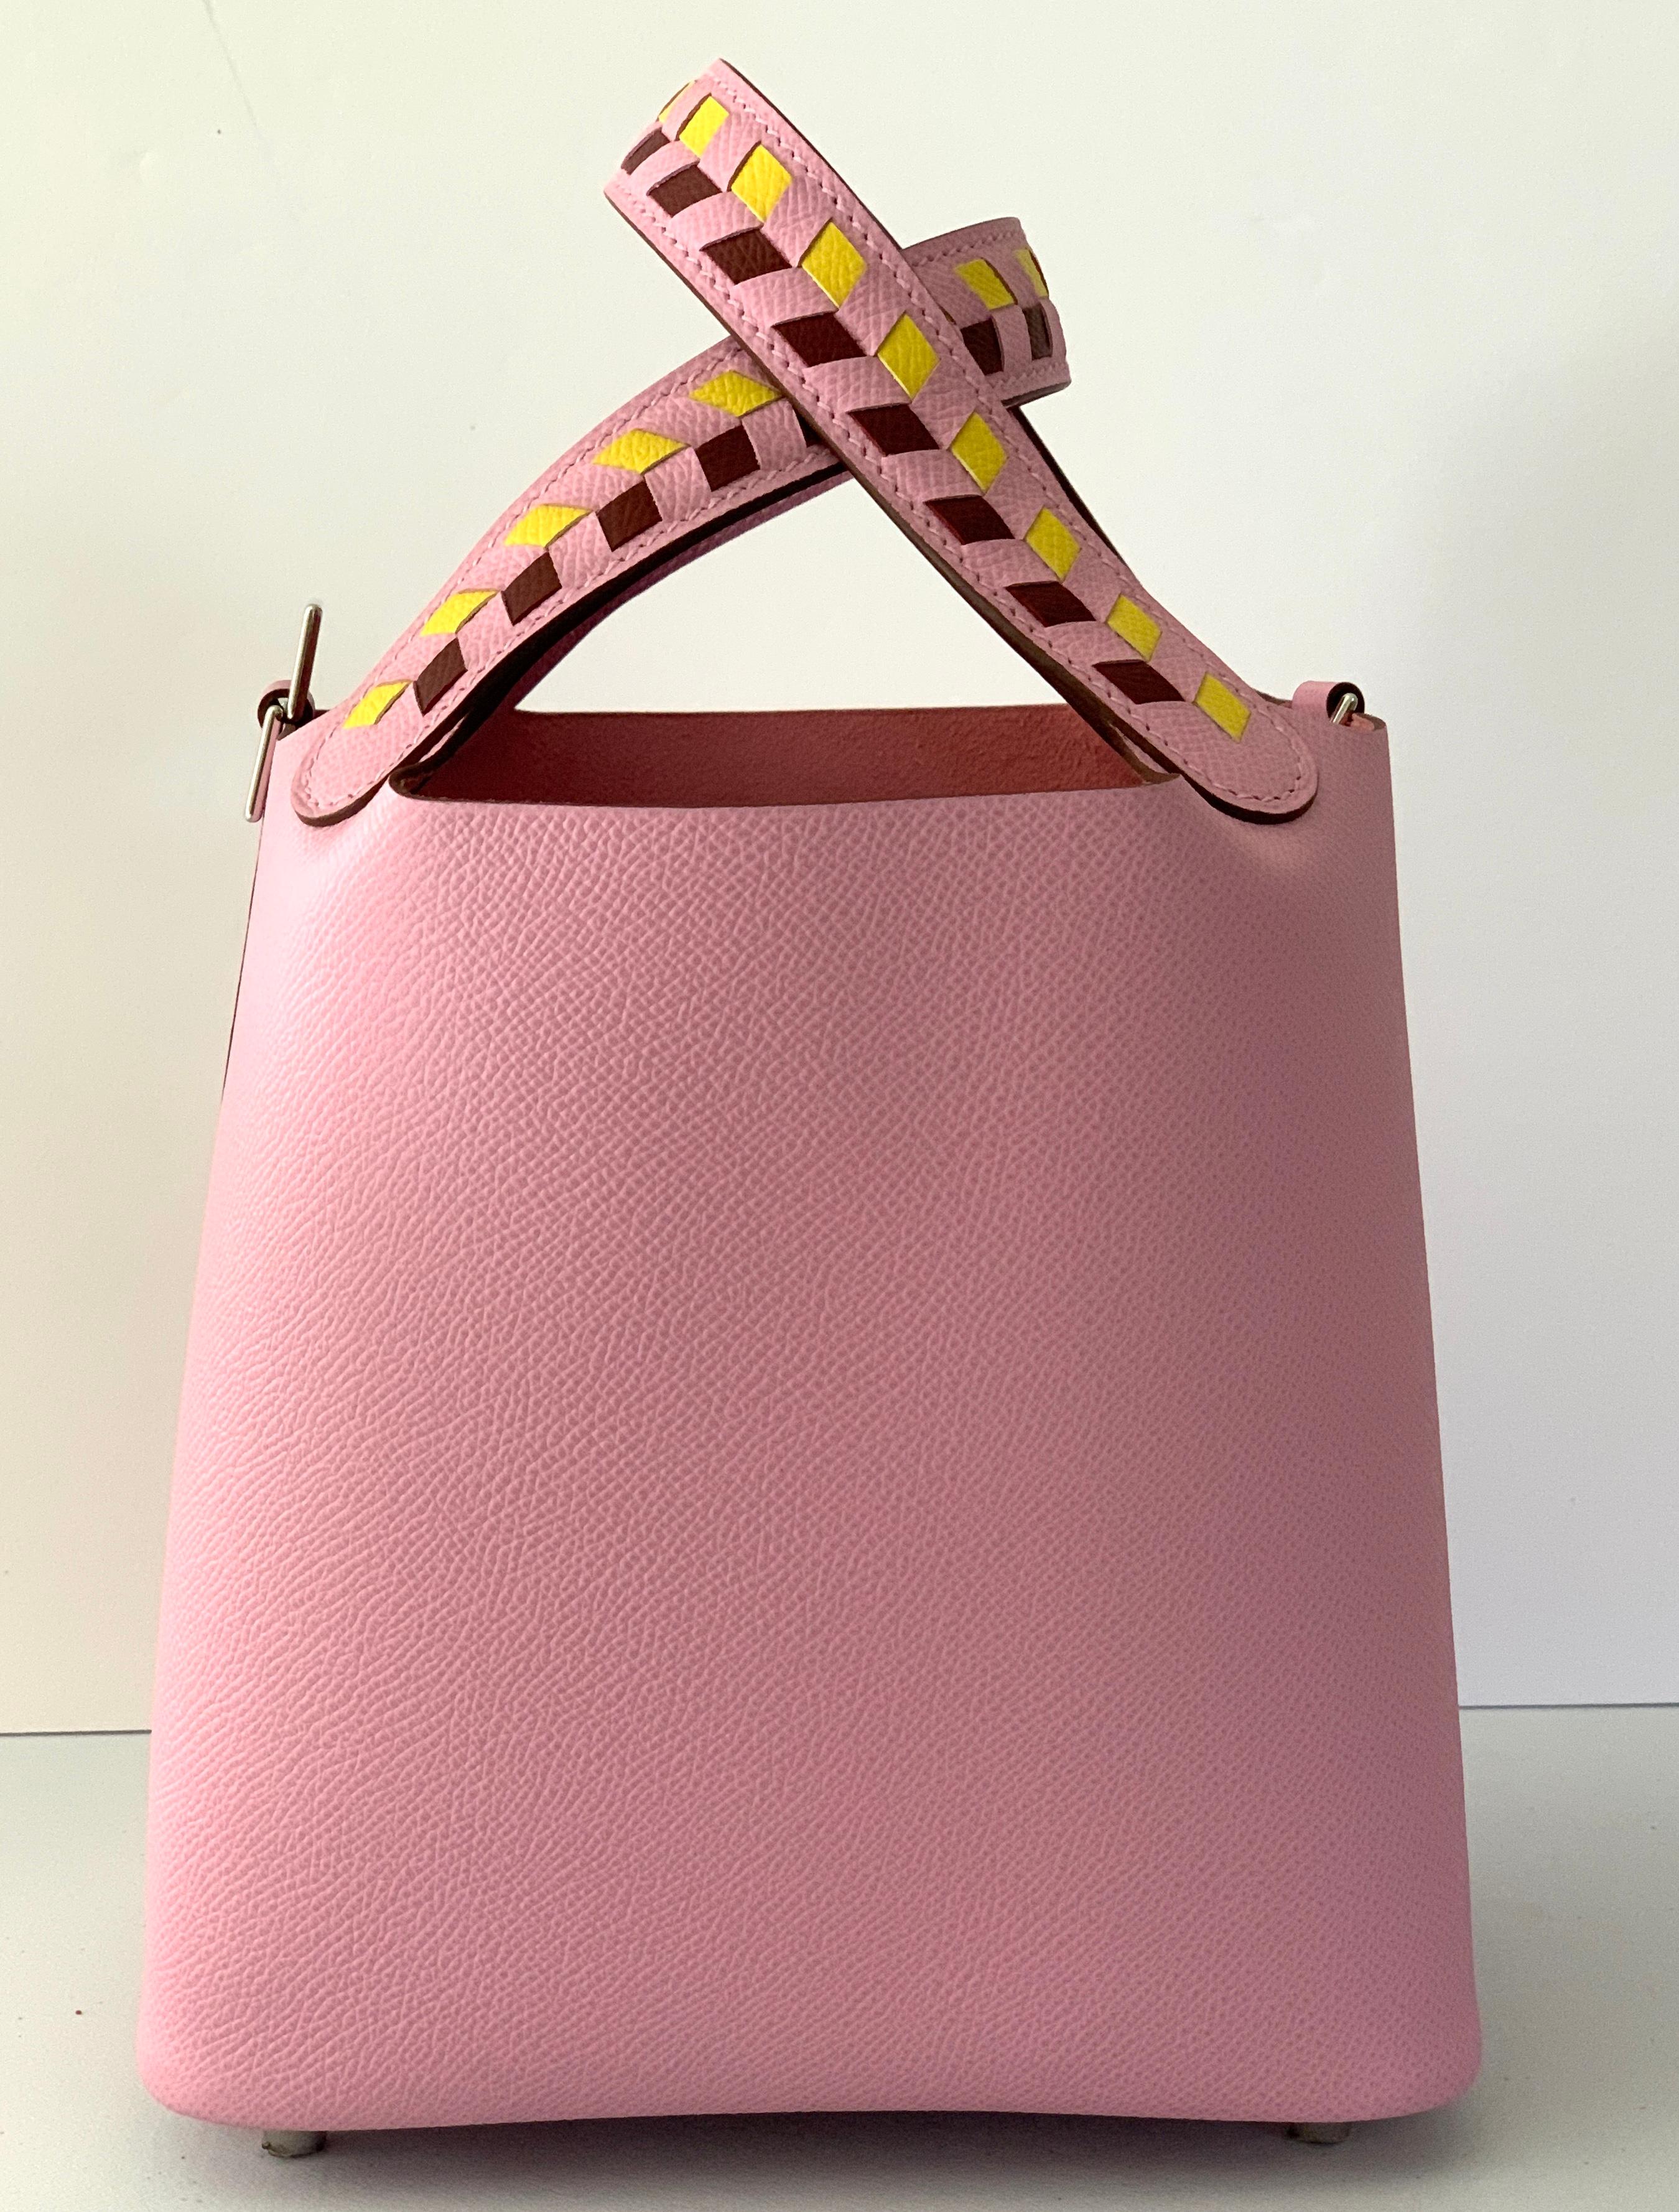 Guaranteed authentic limited edition Hermes Picotin Lock 18cm Tressage Bag

Mauve Sylvestre with Mauve Sylvestre, Rouge H, and Jaune Naple handle.

This exquisite new colour is the perfect neutral for Spring/Summer.

Leather: Epsom,so nice and